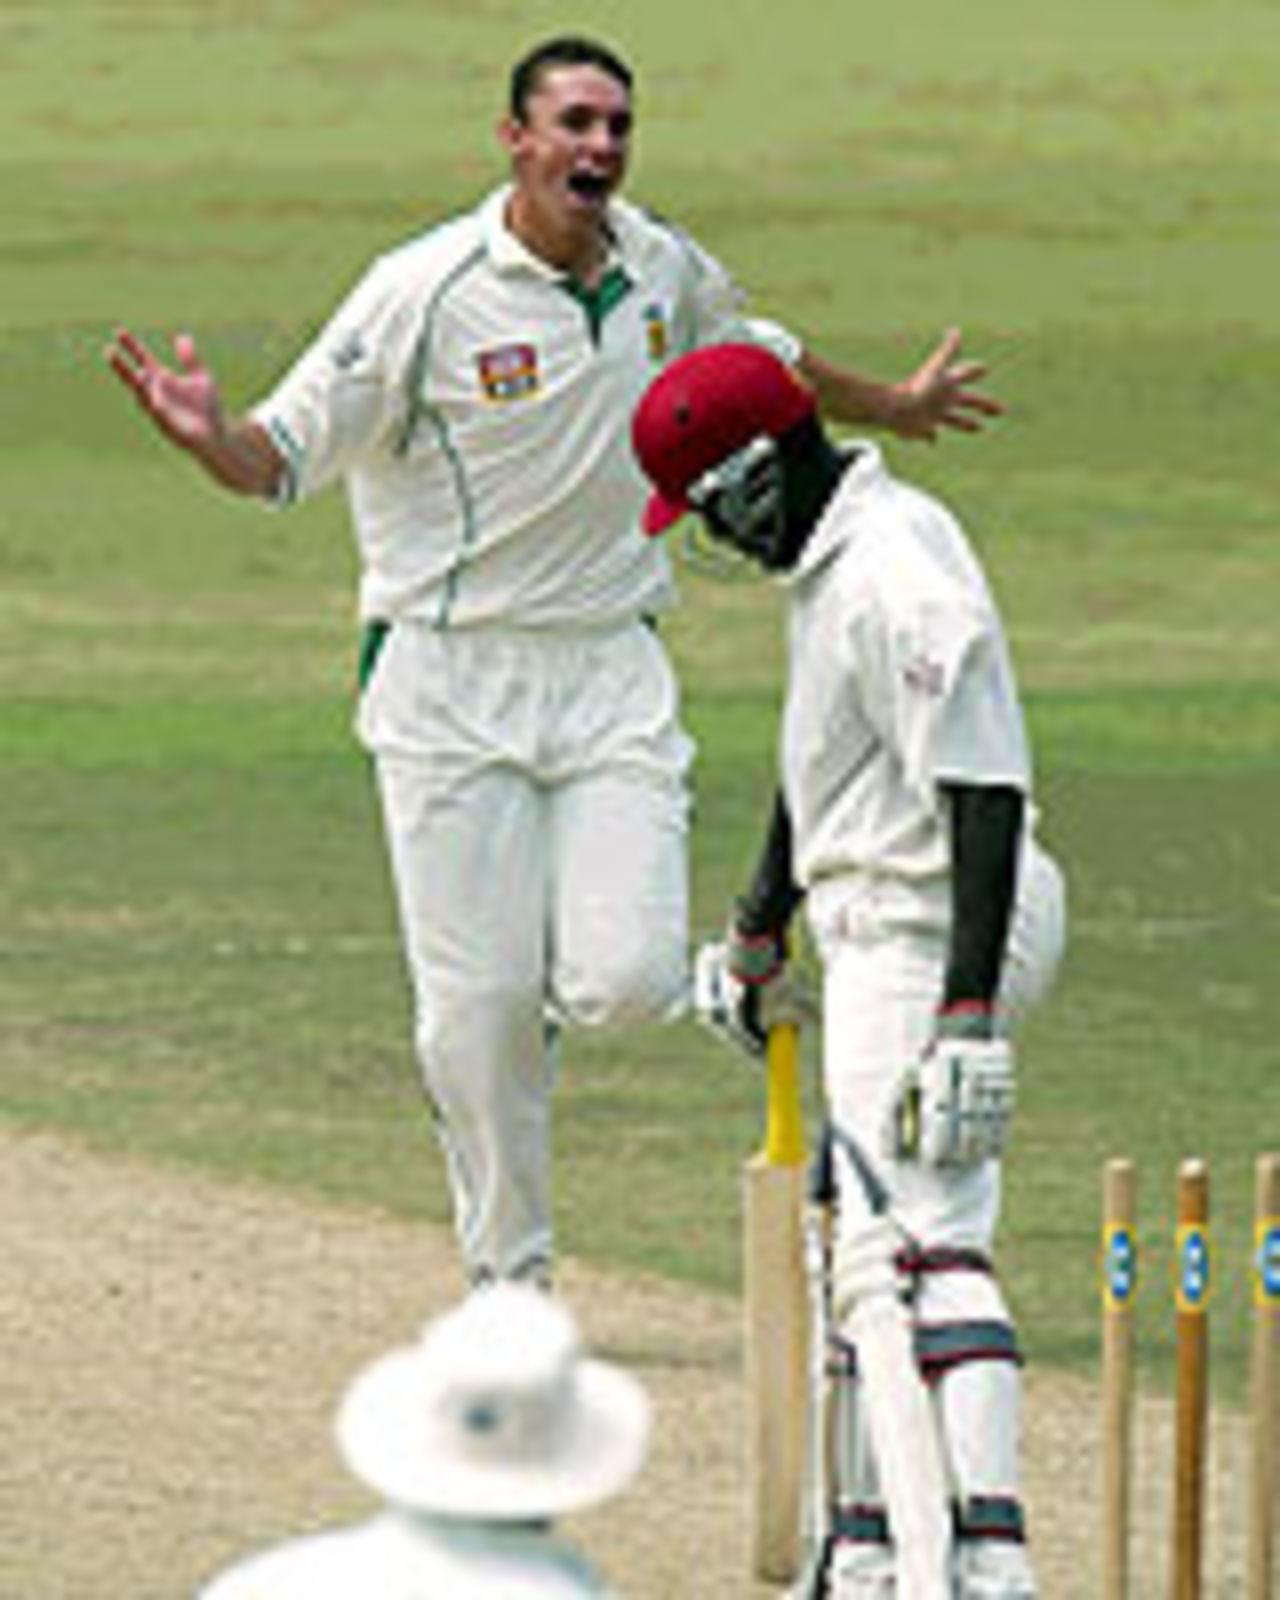 Andre Nel yorks Wavell Hinds with his fourth ball of the day, South Africa v West Indies, Durban, December 29, 2003